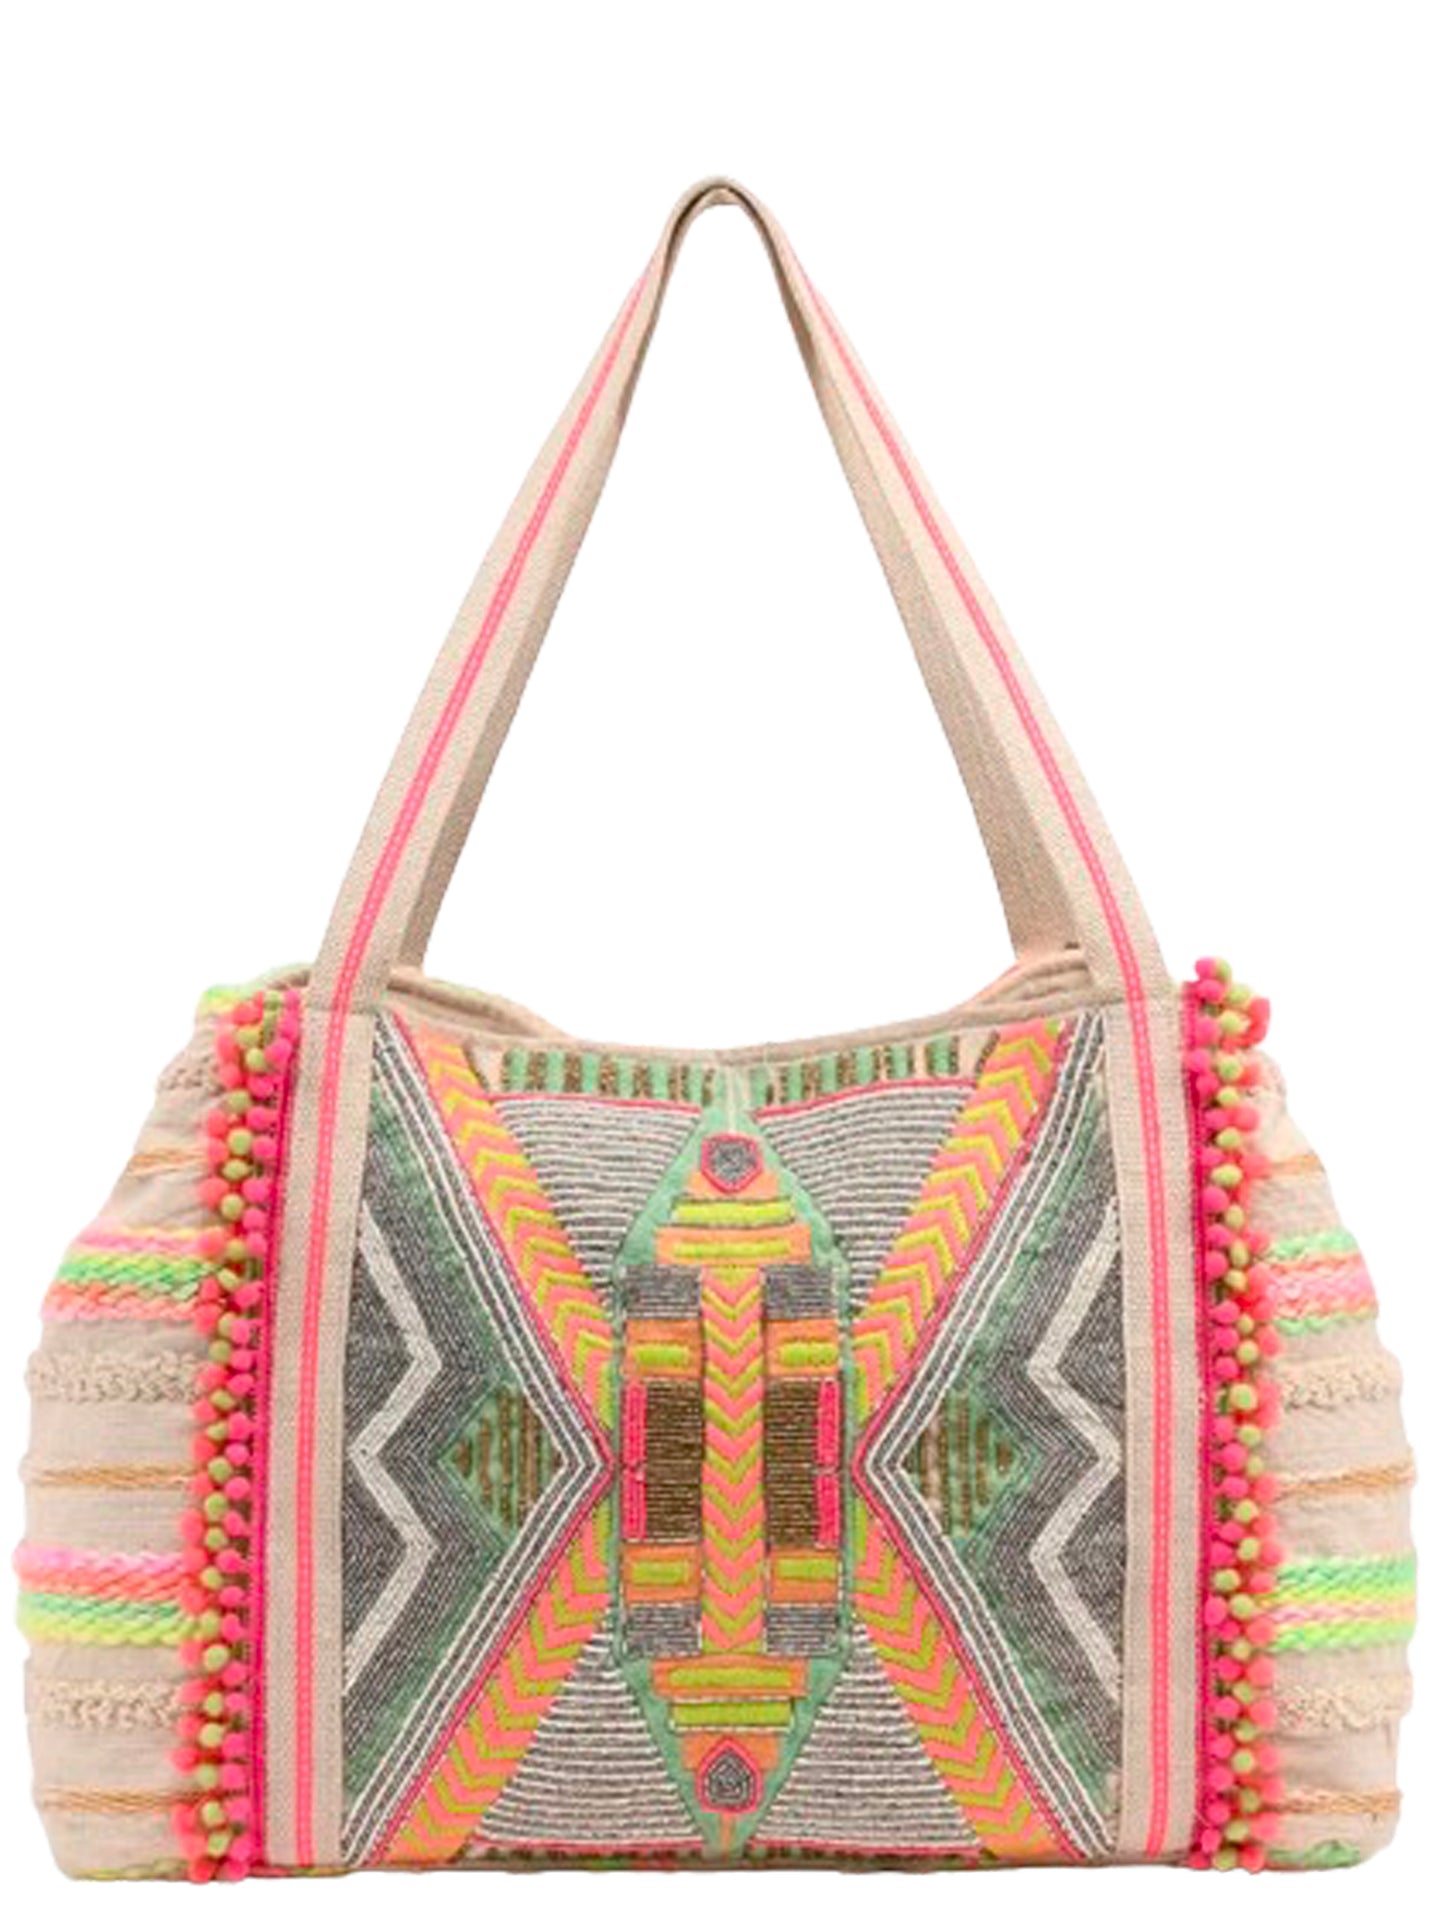 neon aztec embellished tote